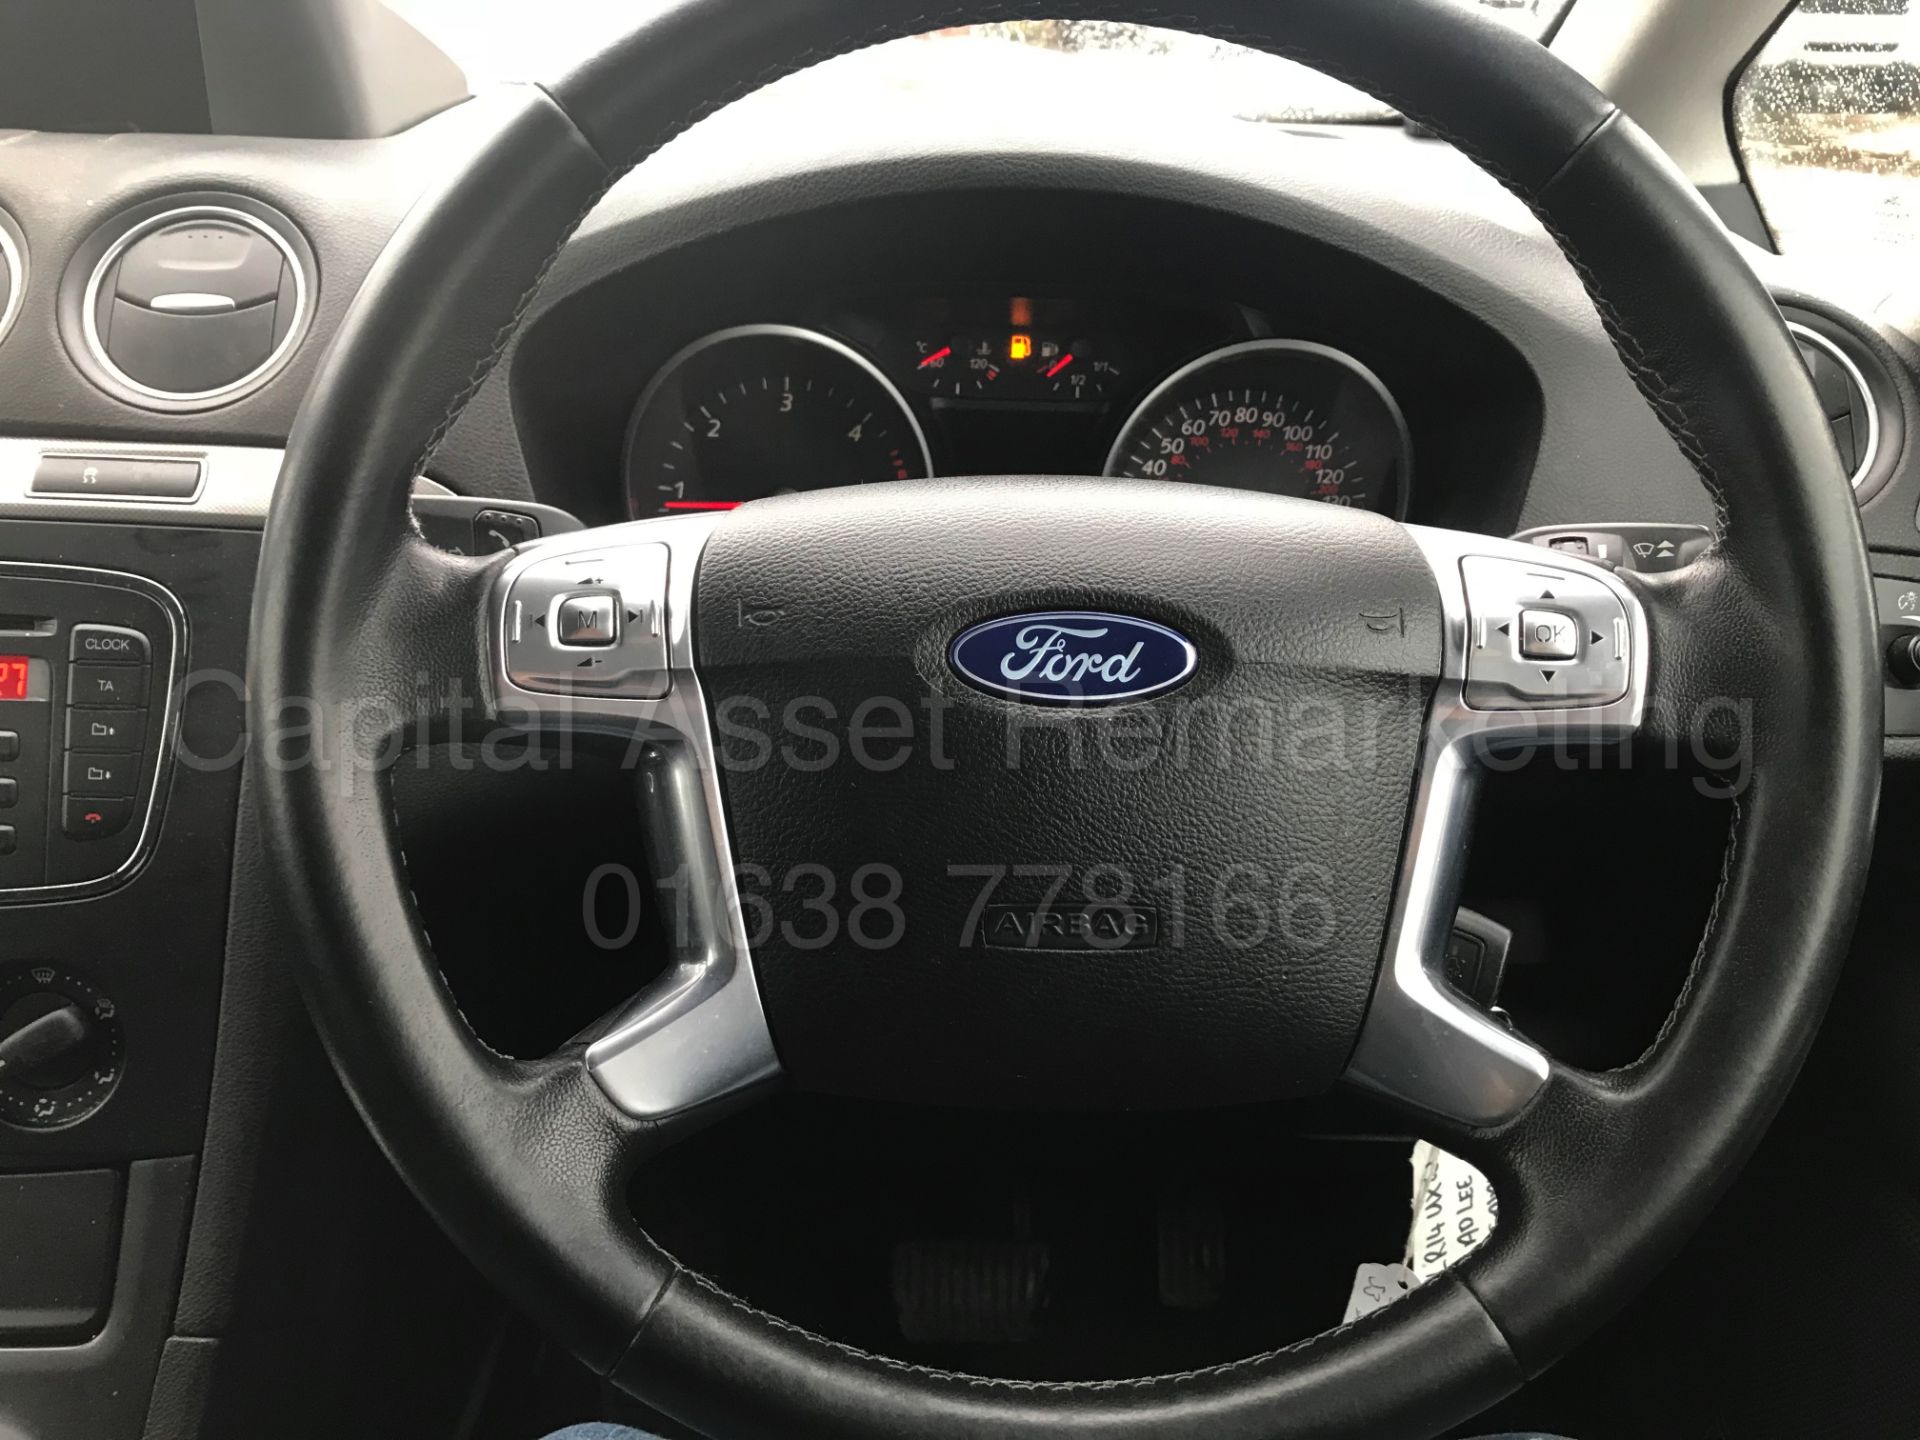 (On Sale) FORD GALAXY 'ZETEC' 7 SEATER (2014 - 14 REG) 2.0 TDCI - 140 BHP - POWER SHIFT (1 OWNER) - Image 29 of 30